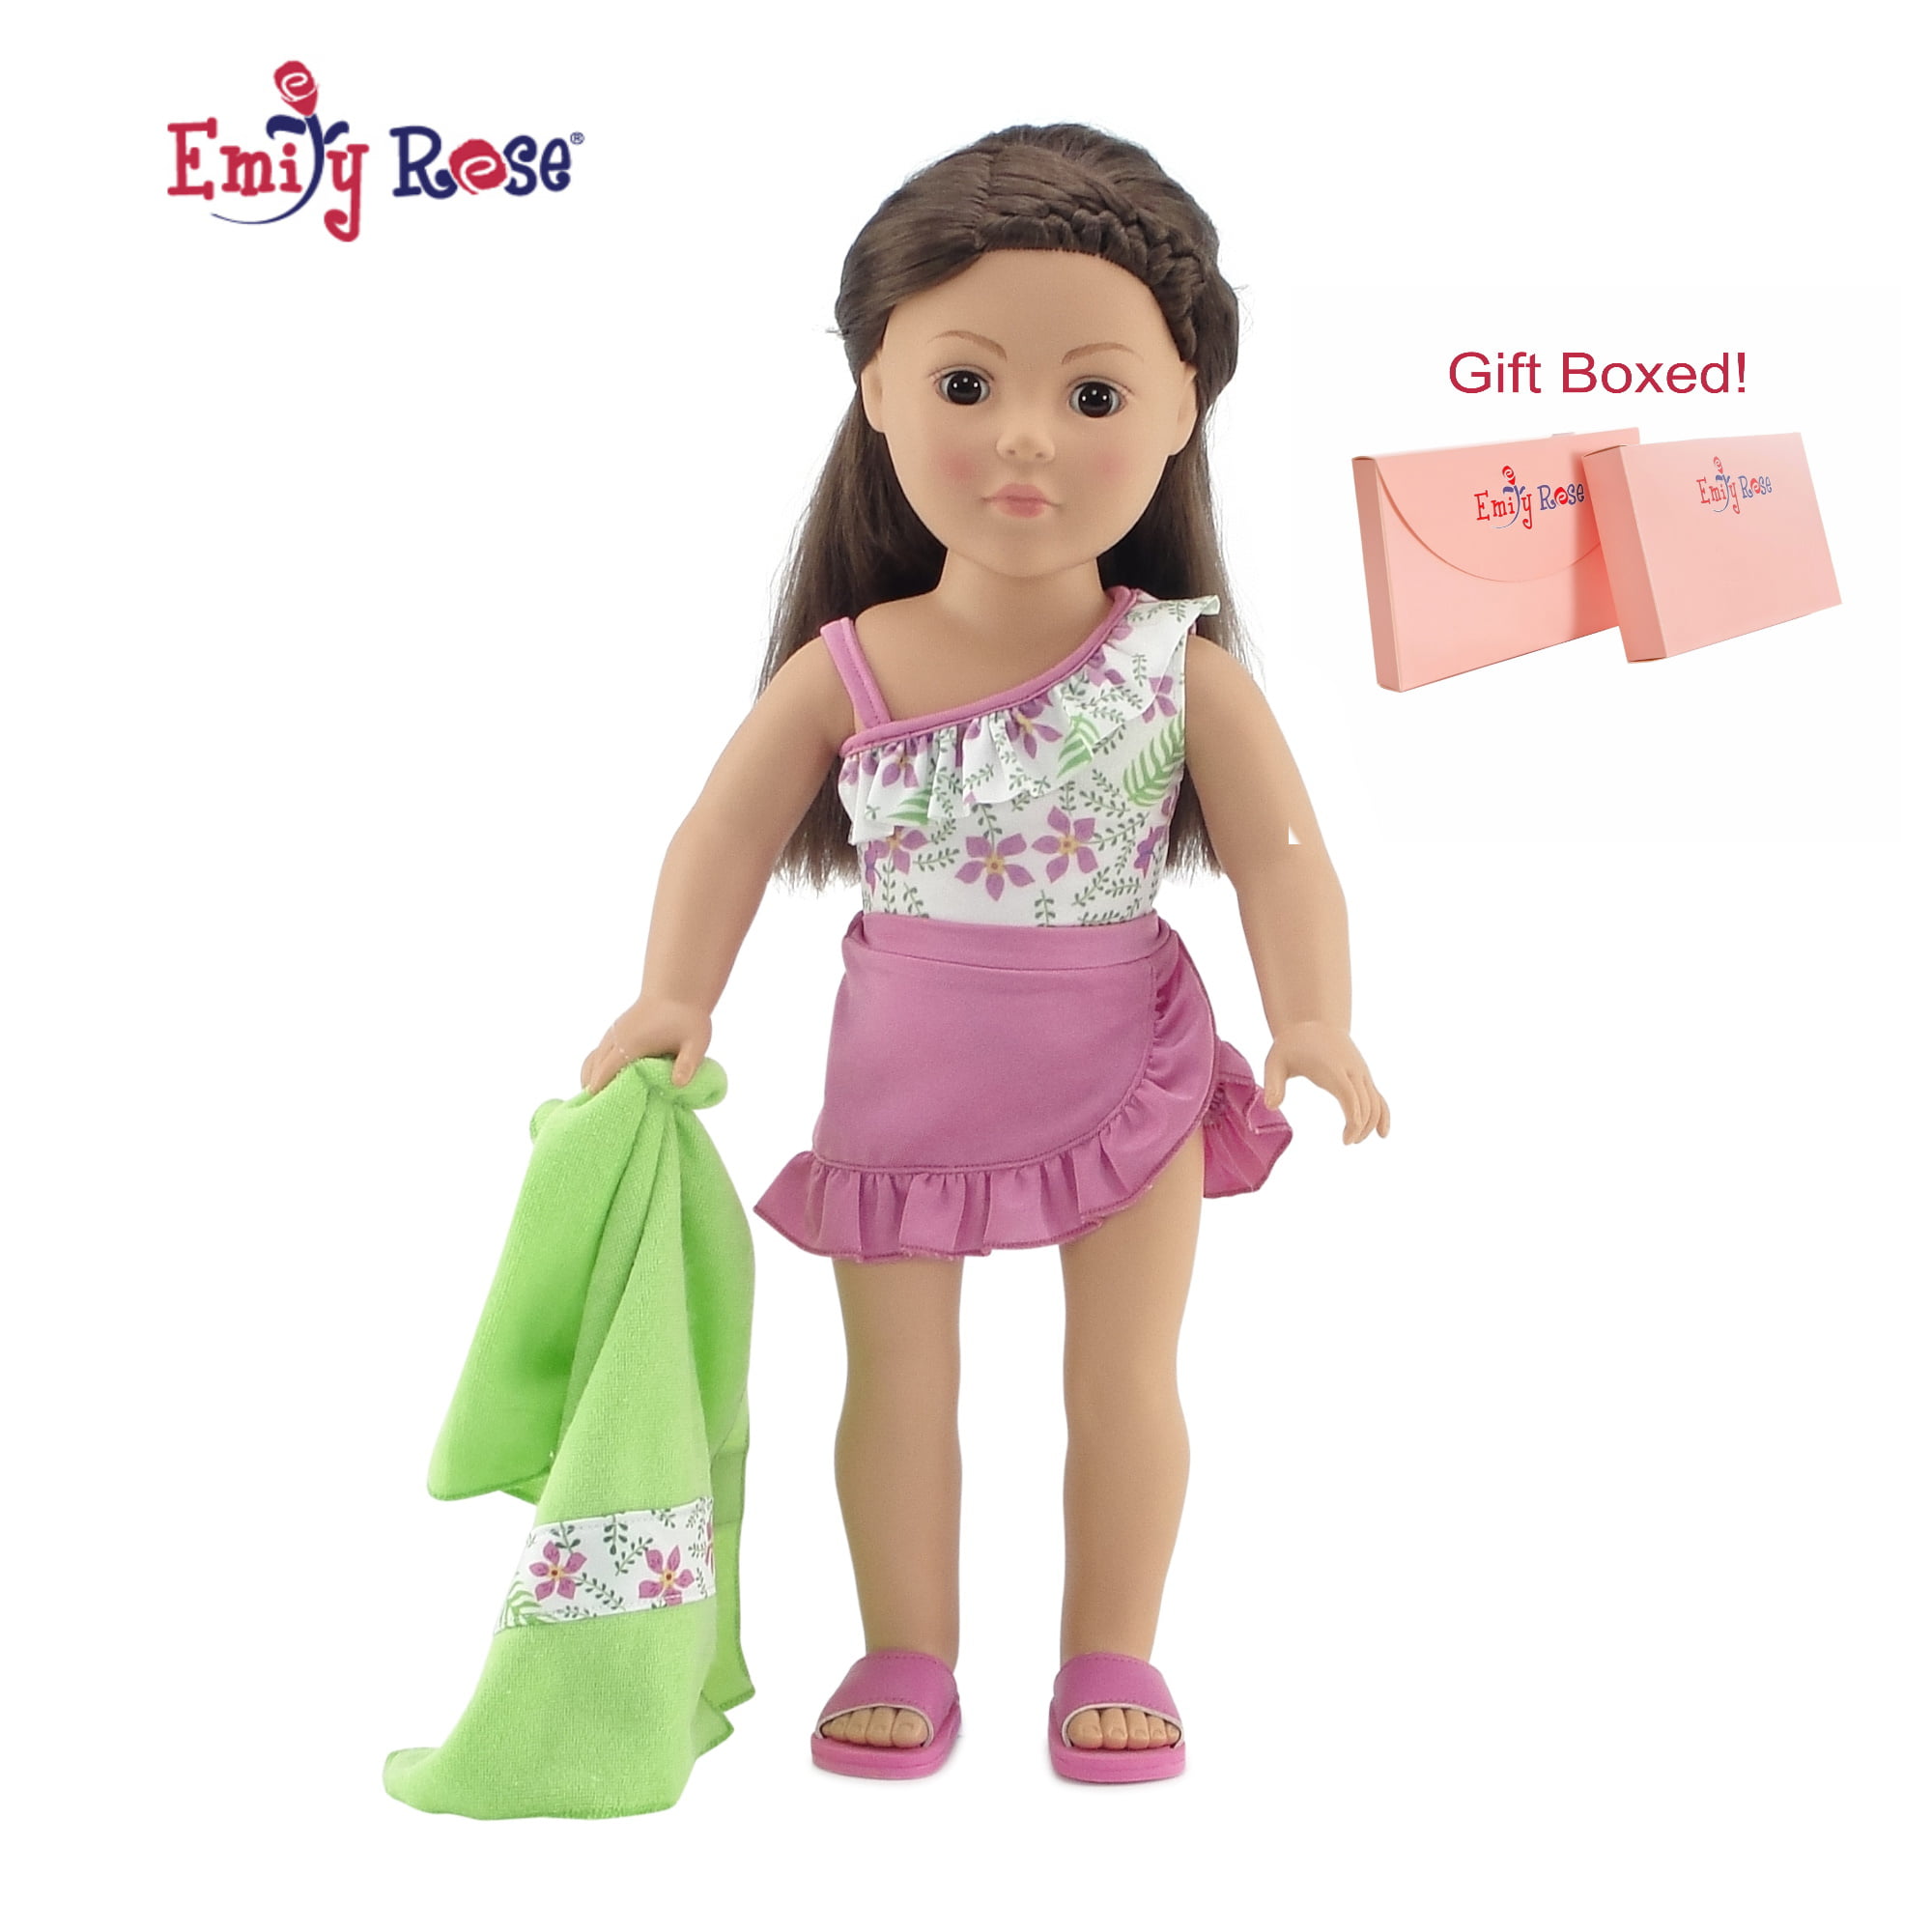 Doll Clothes I8 Inch American Girl Dolls Our Generation Green Singlet Top